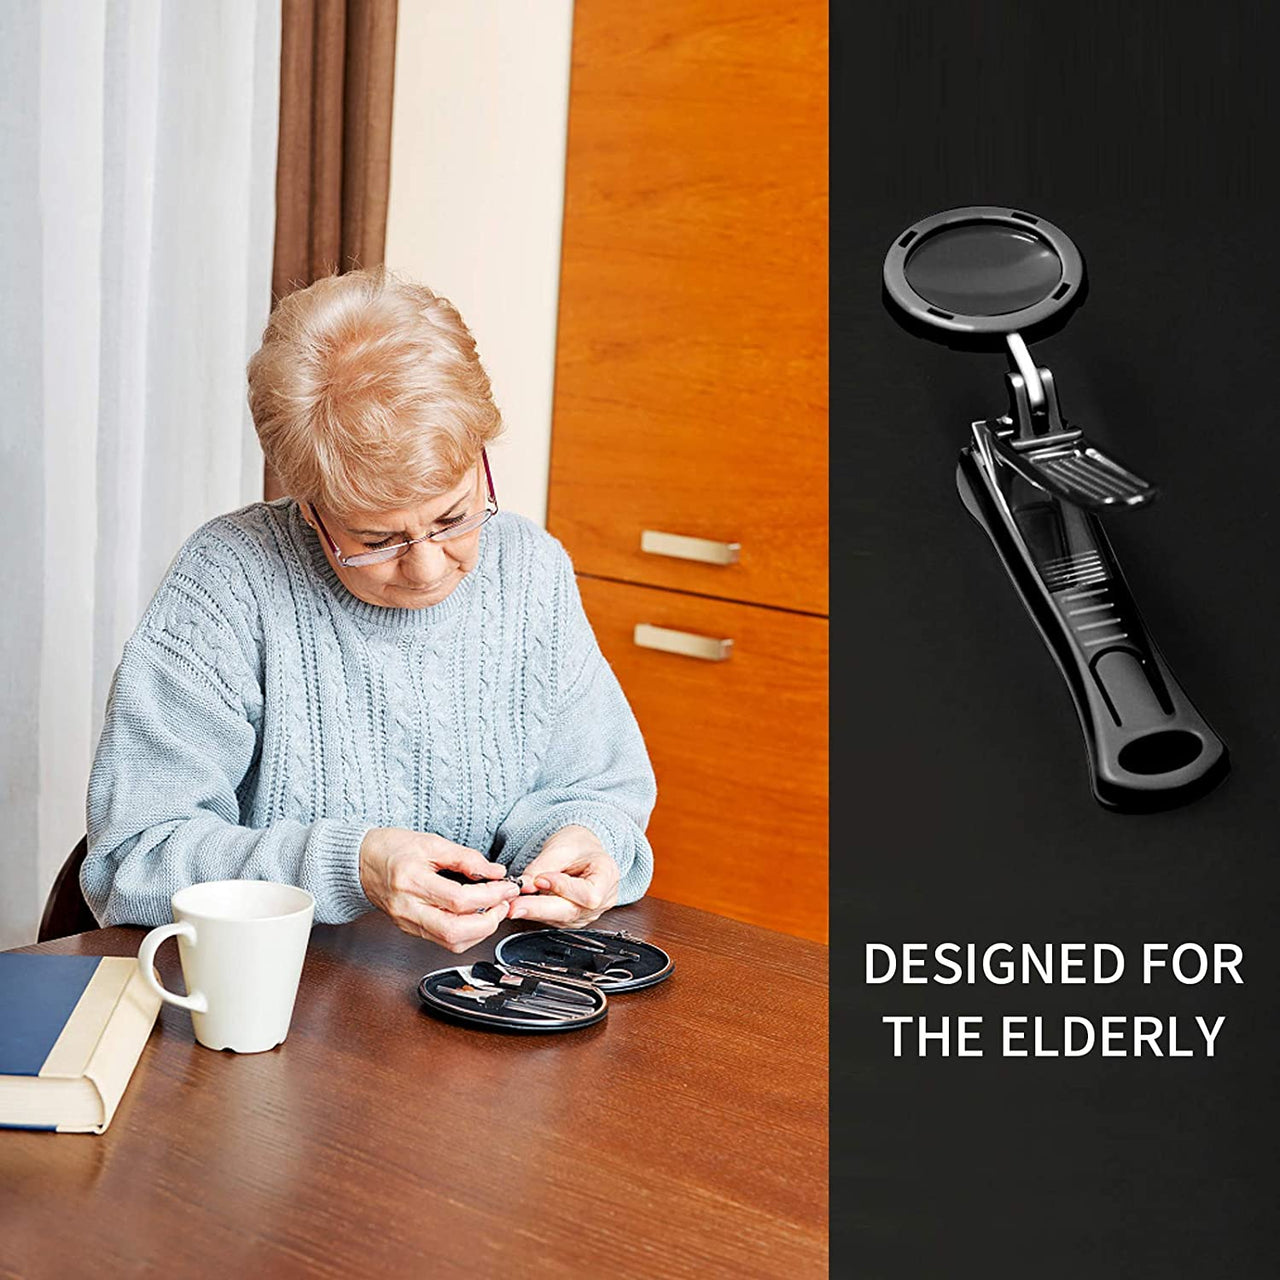 Magnifying Glass Nail Clippers/Just Arrived - LightsBetter